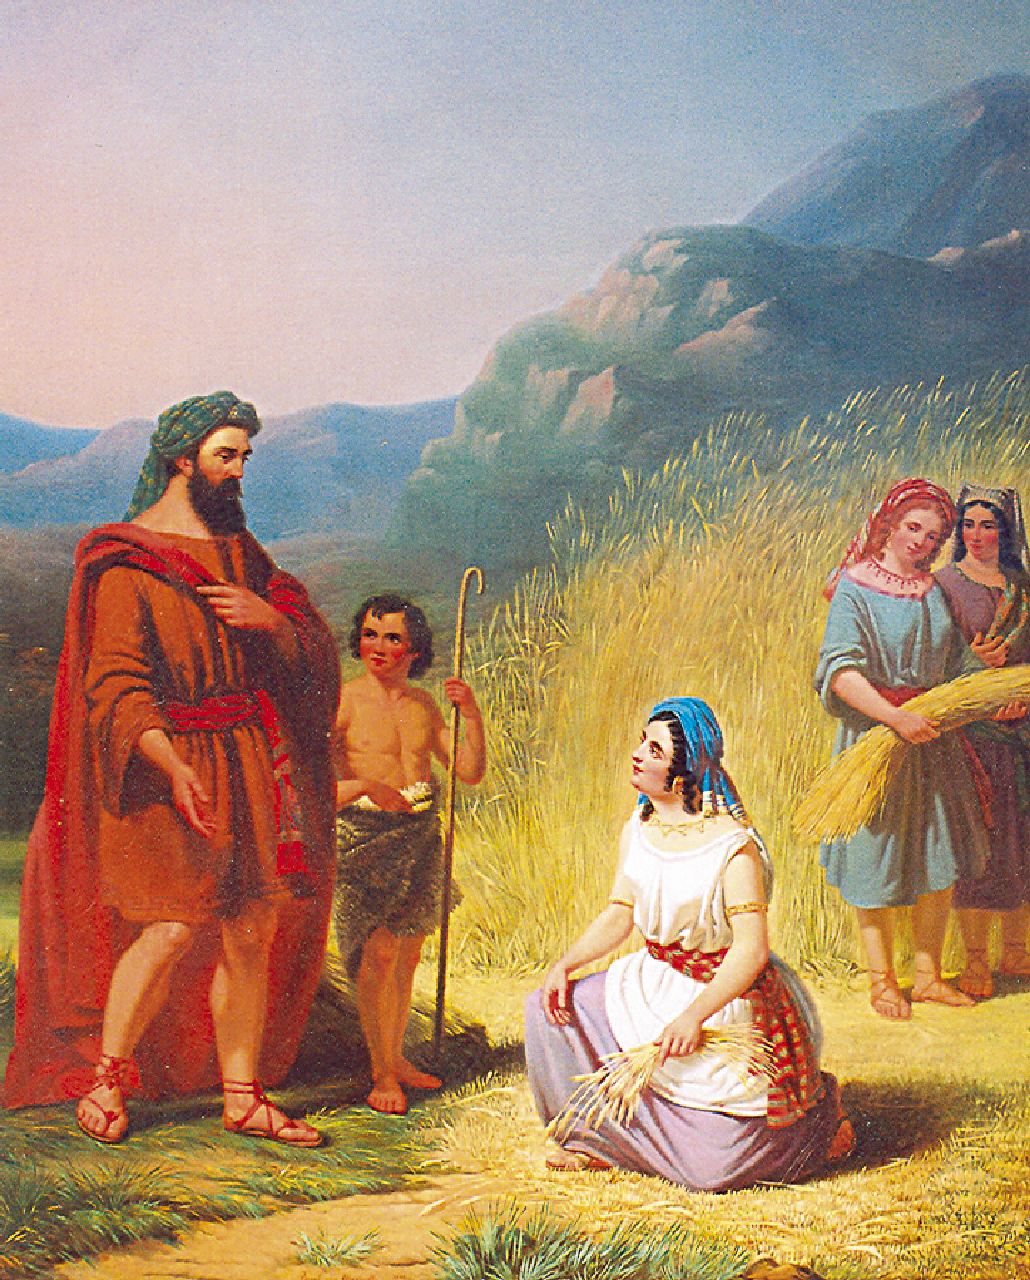 Jan Braet von Uberfeldt | Ruth and Boaz, oil on canvas, 140.0 x 115.0 cm, signed l.r. and dated 1862